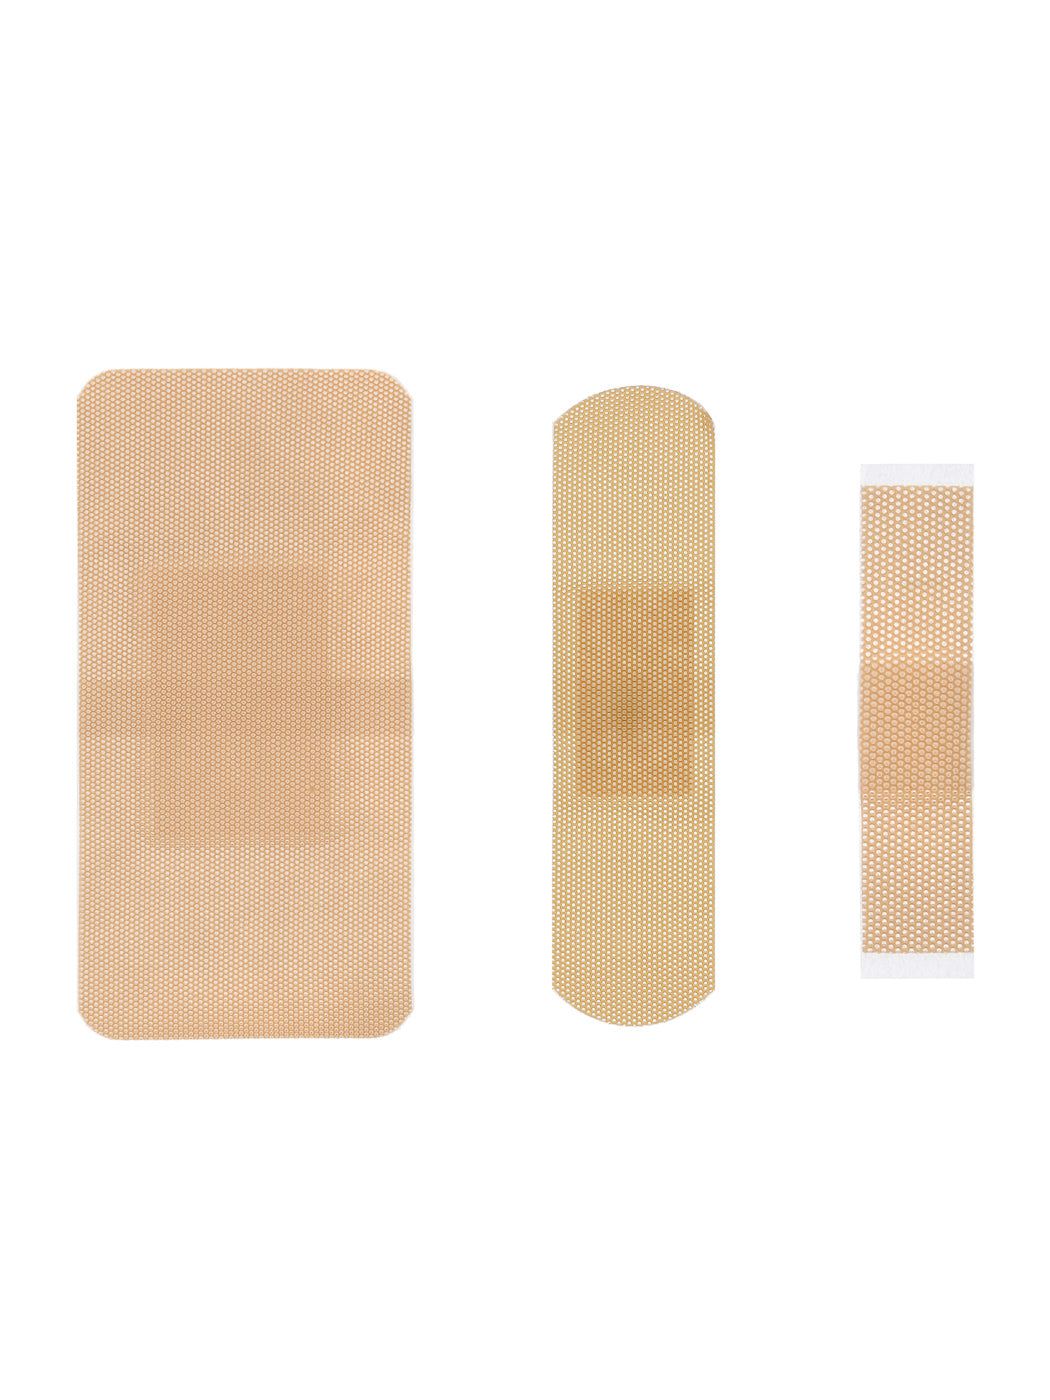 MINISO BREATHABLE WATERPROOF BANDAGE PACK (50 COUNT) (NUDE COLOR) 0200048211 BAND-AIDS